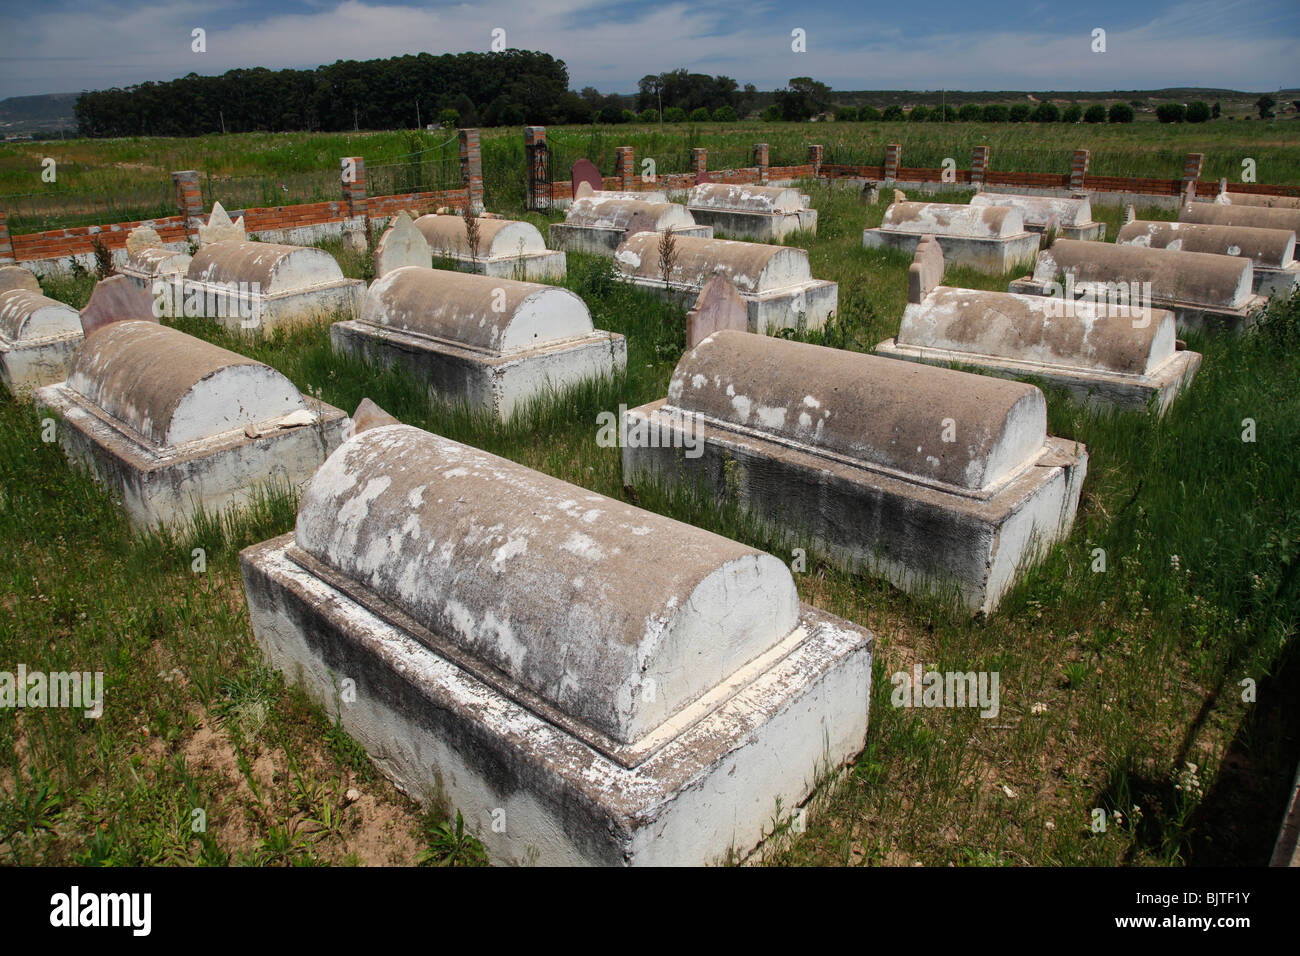 Boer cemetery of early Boer settlers from the 1800's, Nr Lubango, Huila Province, Angola. Africa. Stock Photo